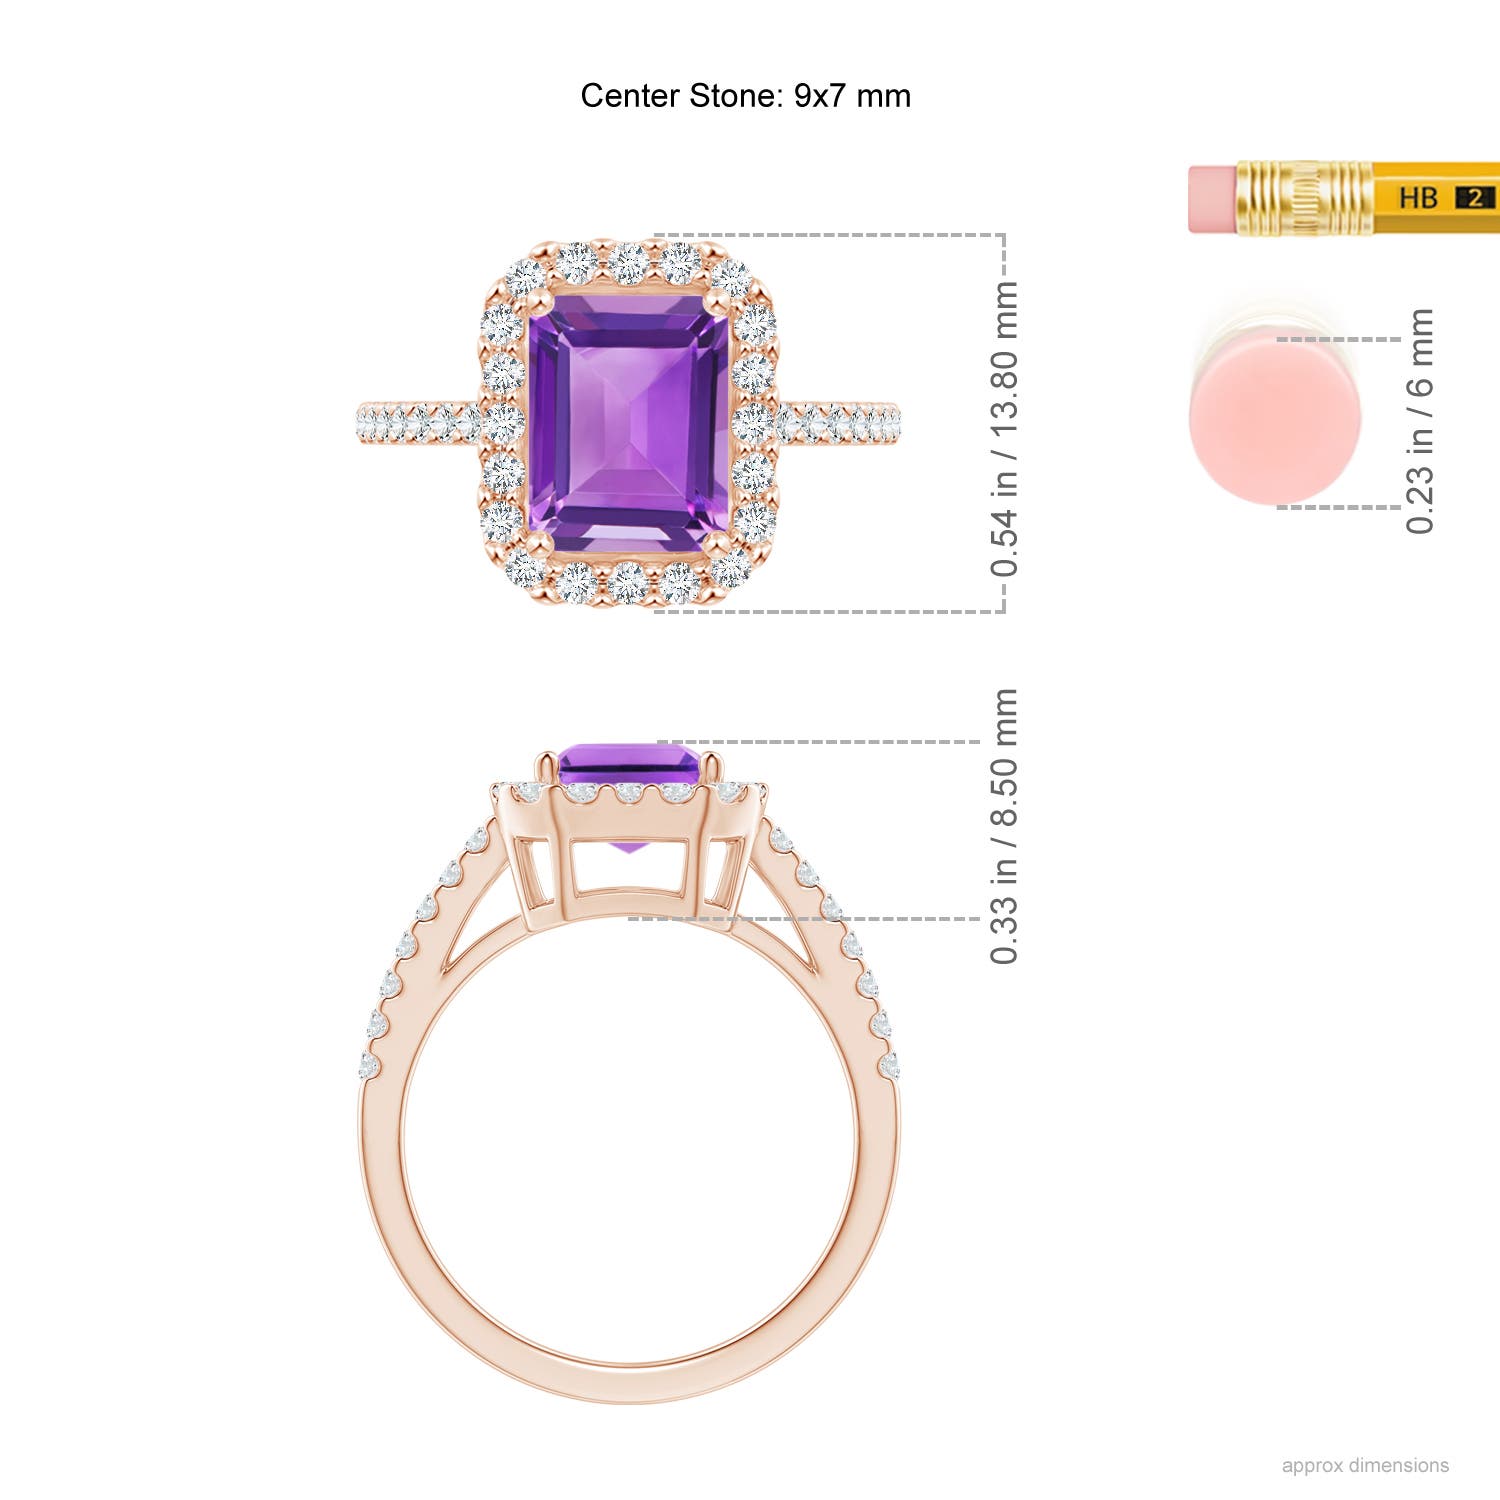 AA - Amethyst / 2.68 CT / 14 KT Rose Gold